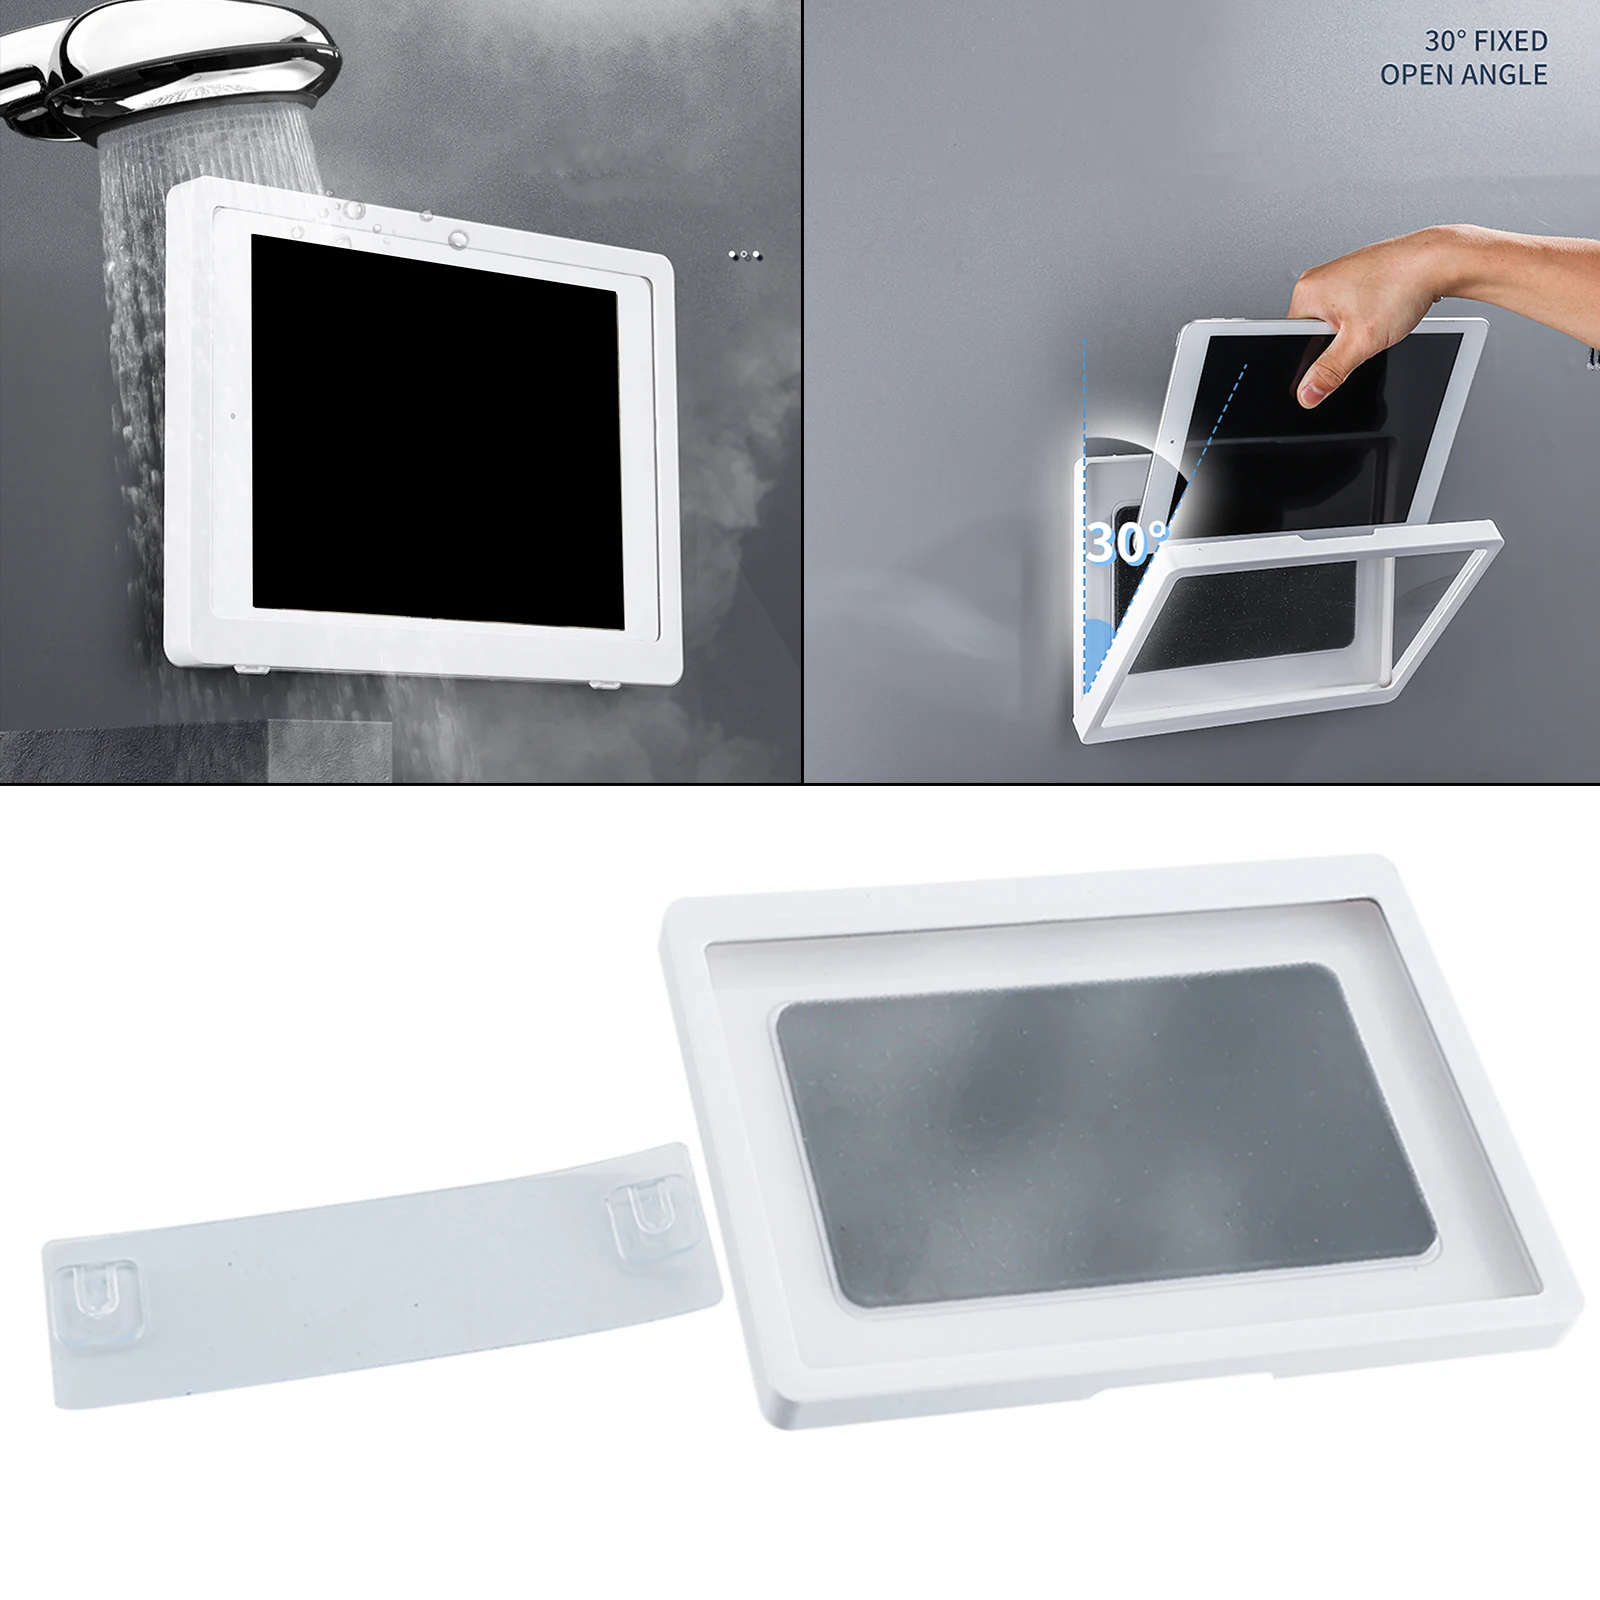 Wall Mounted Shower Tablet Holder Cover Waterproof Anti-Fog Touch Screen Bathroom Bathtub Tablet Storage Case